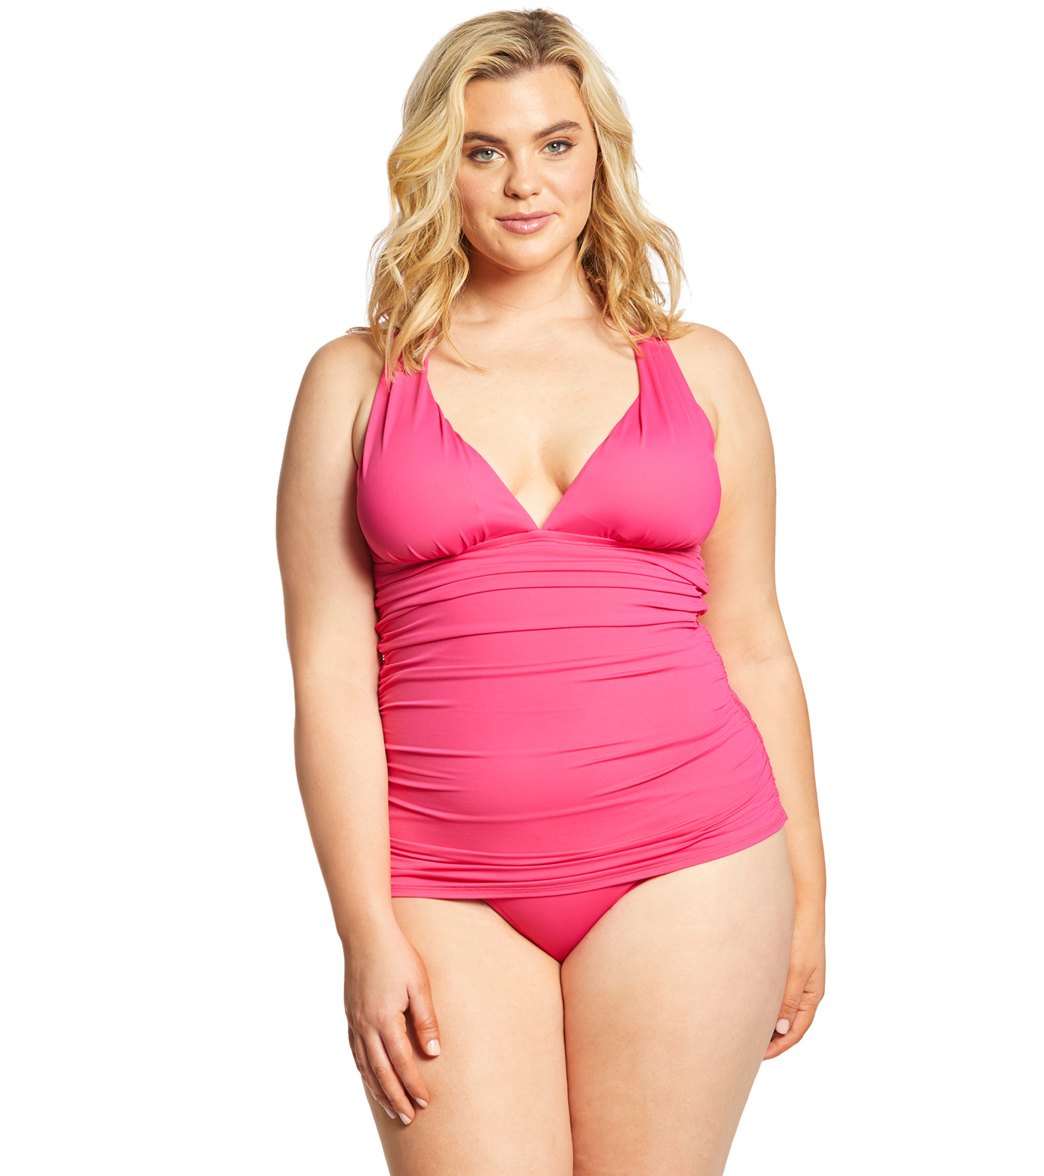 Lauren Ralph Lauren Plus Size Beach Club Solid Plunge Halter Skirted One Piece Swimsuit At Swimoutlet Com Free Shipping Also set sale alerts and shop exclusive offers only on shopstyle uk. lauren ralph lauren plus size beach club solid plunge halter skirted one piece swimsuit